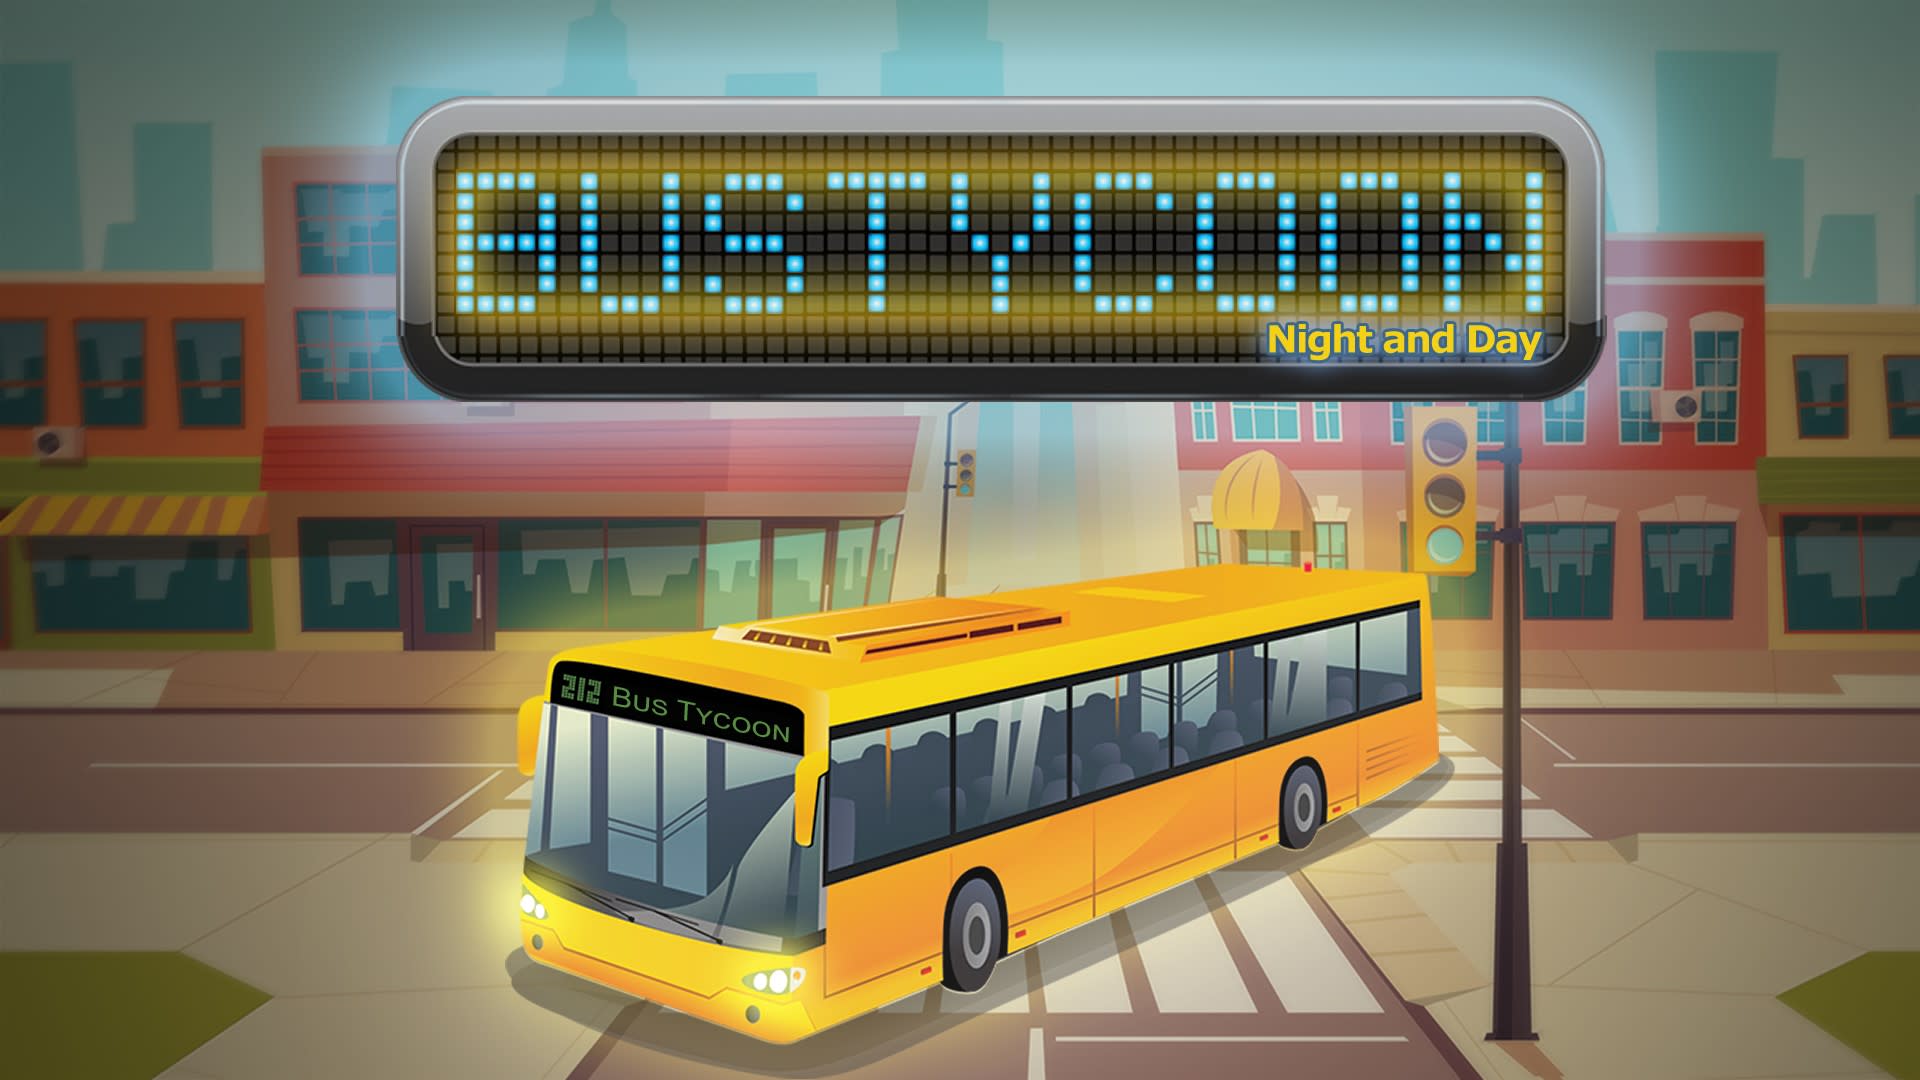 Bus Tycoon Night and Day 1